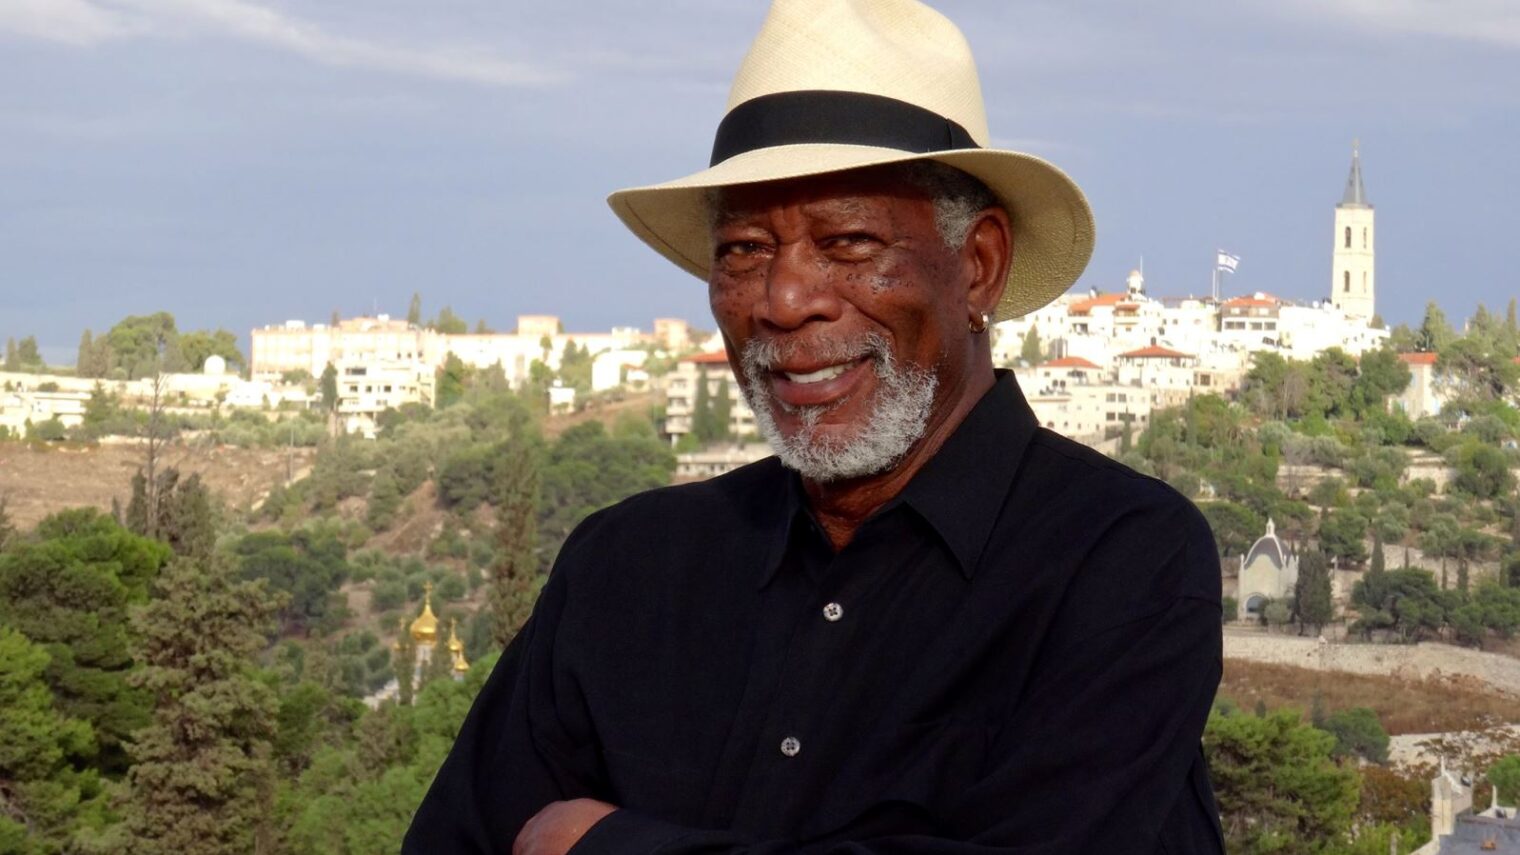 Morgan Freeman in Jerusalem during filming for “The Story of God.” Photo via Facebook